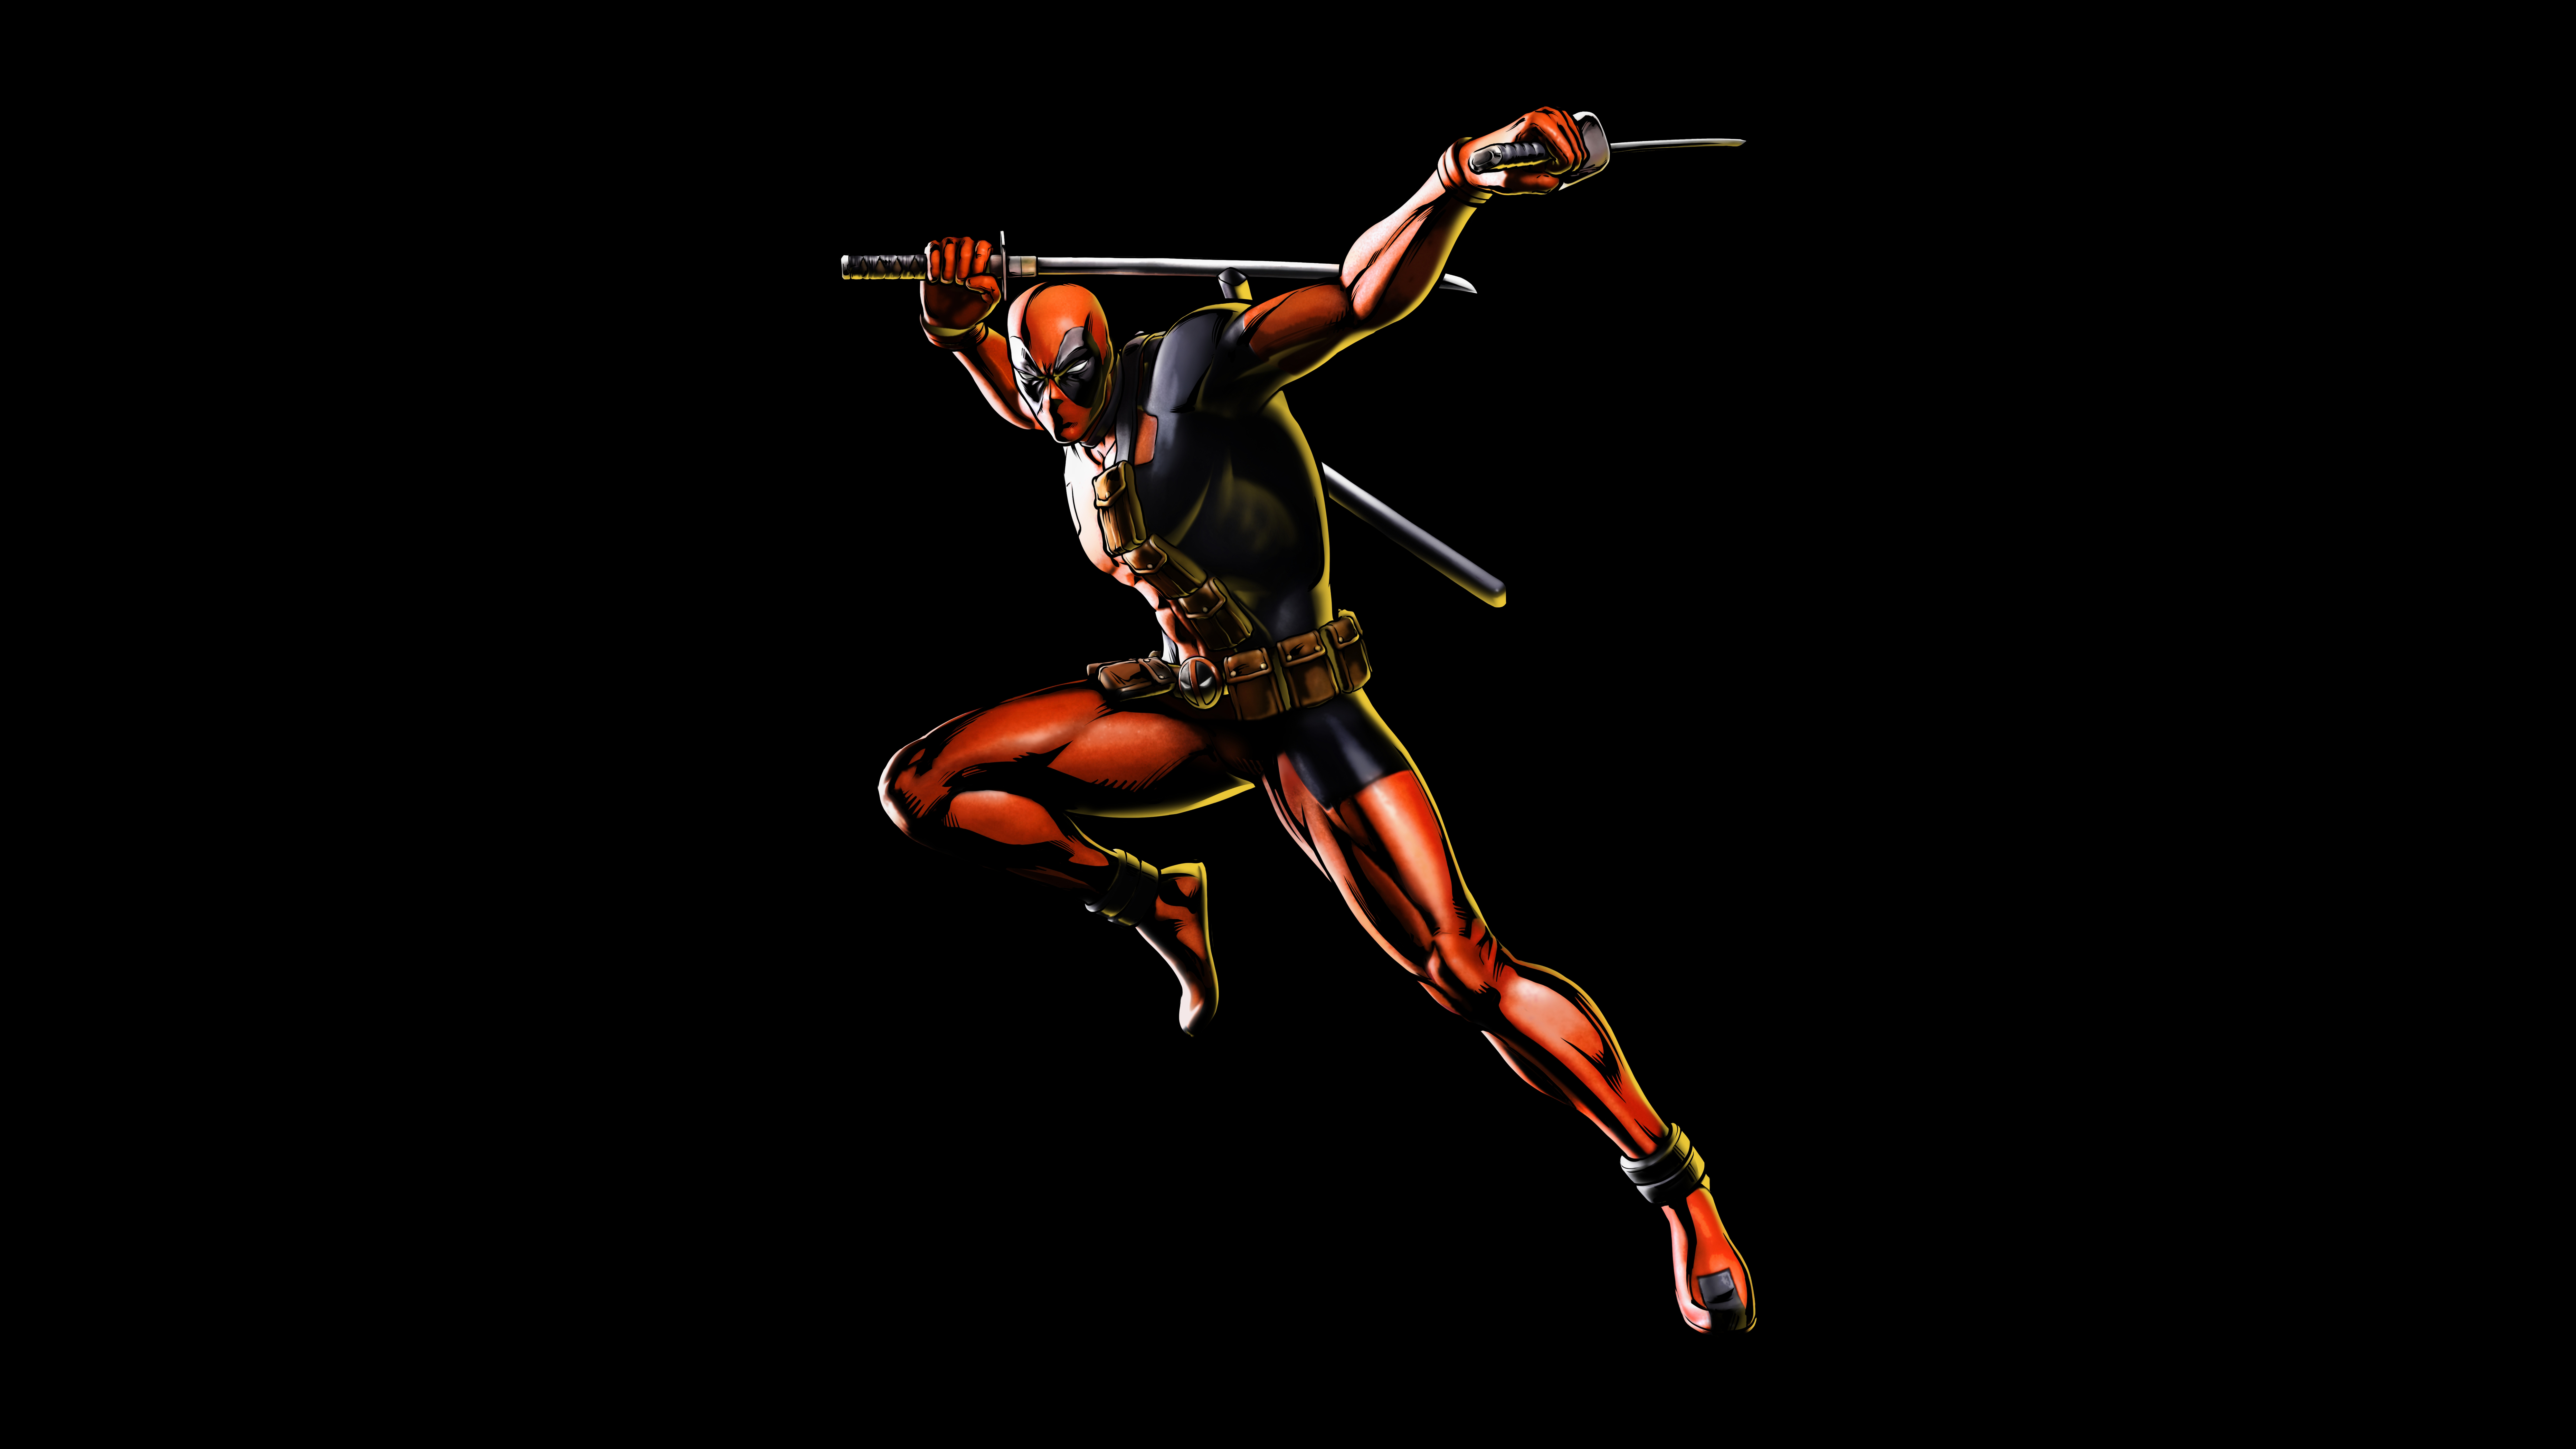 Deadpool Backgrounds, Pictures, Images